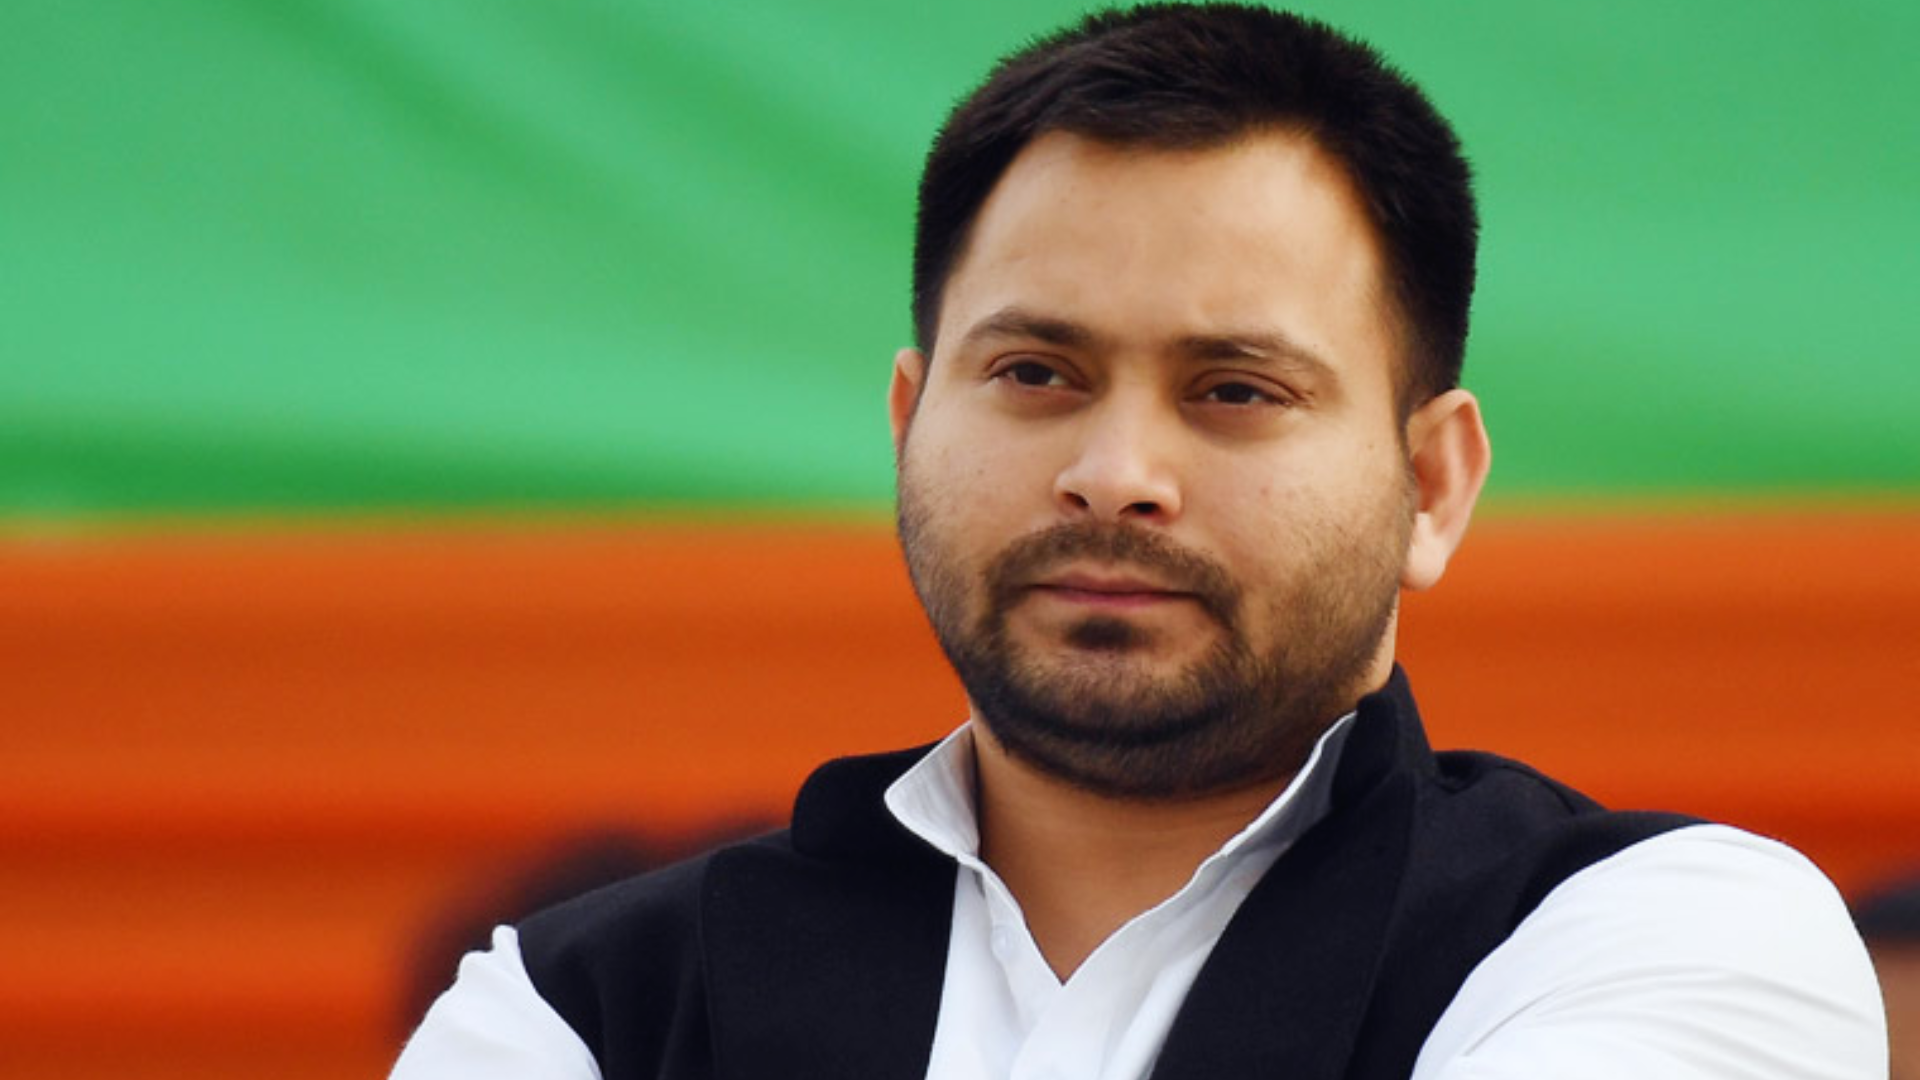 Tejashwi Yadav Claims “I Wanted To Take An IQ Test Of BJP Leaders” After Video Of Him Eating Fish During Navratri Gets Slammed